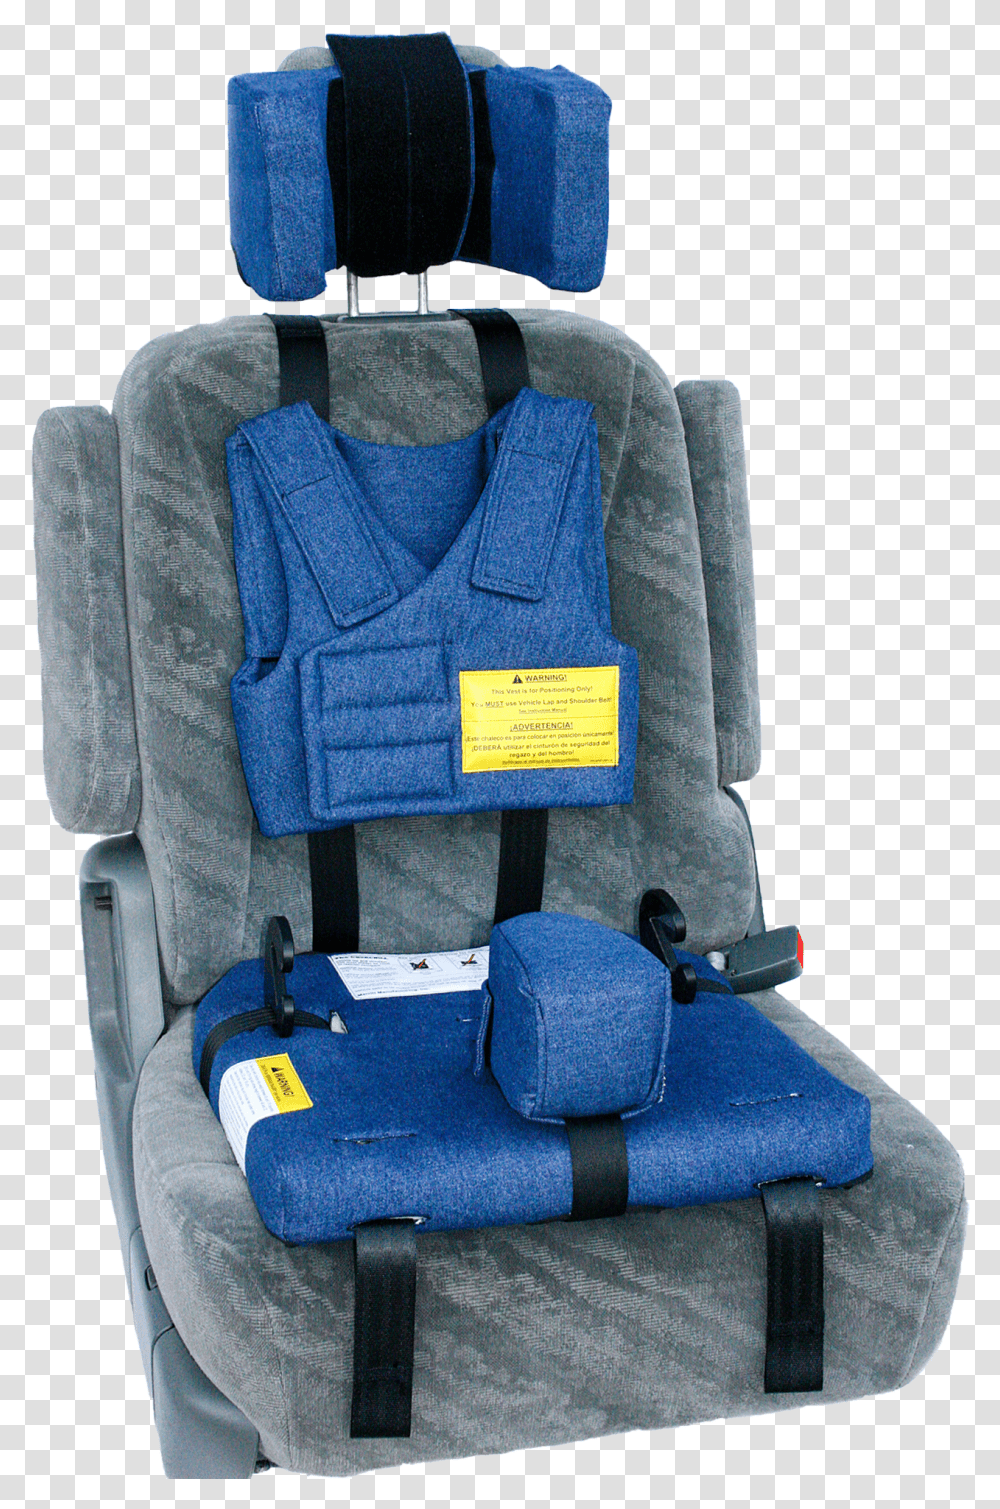 Booster Seat For Special Needs Transparent Png